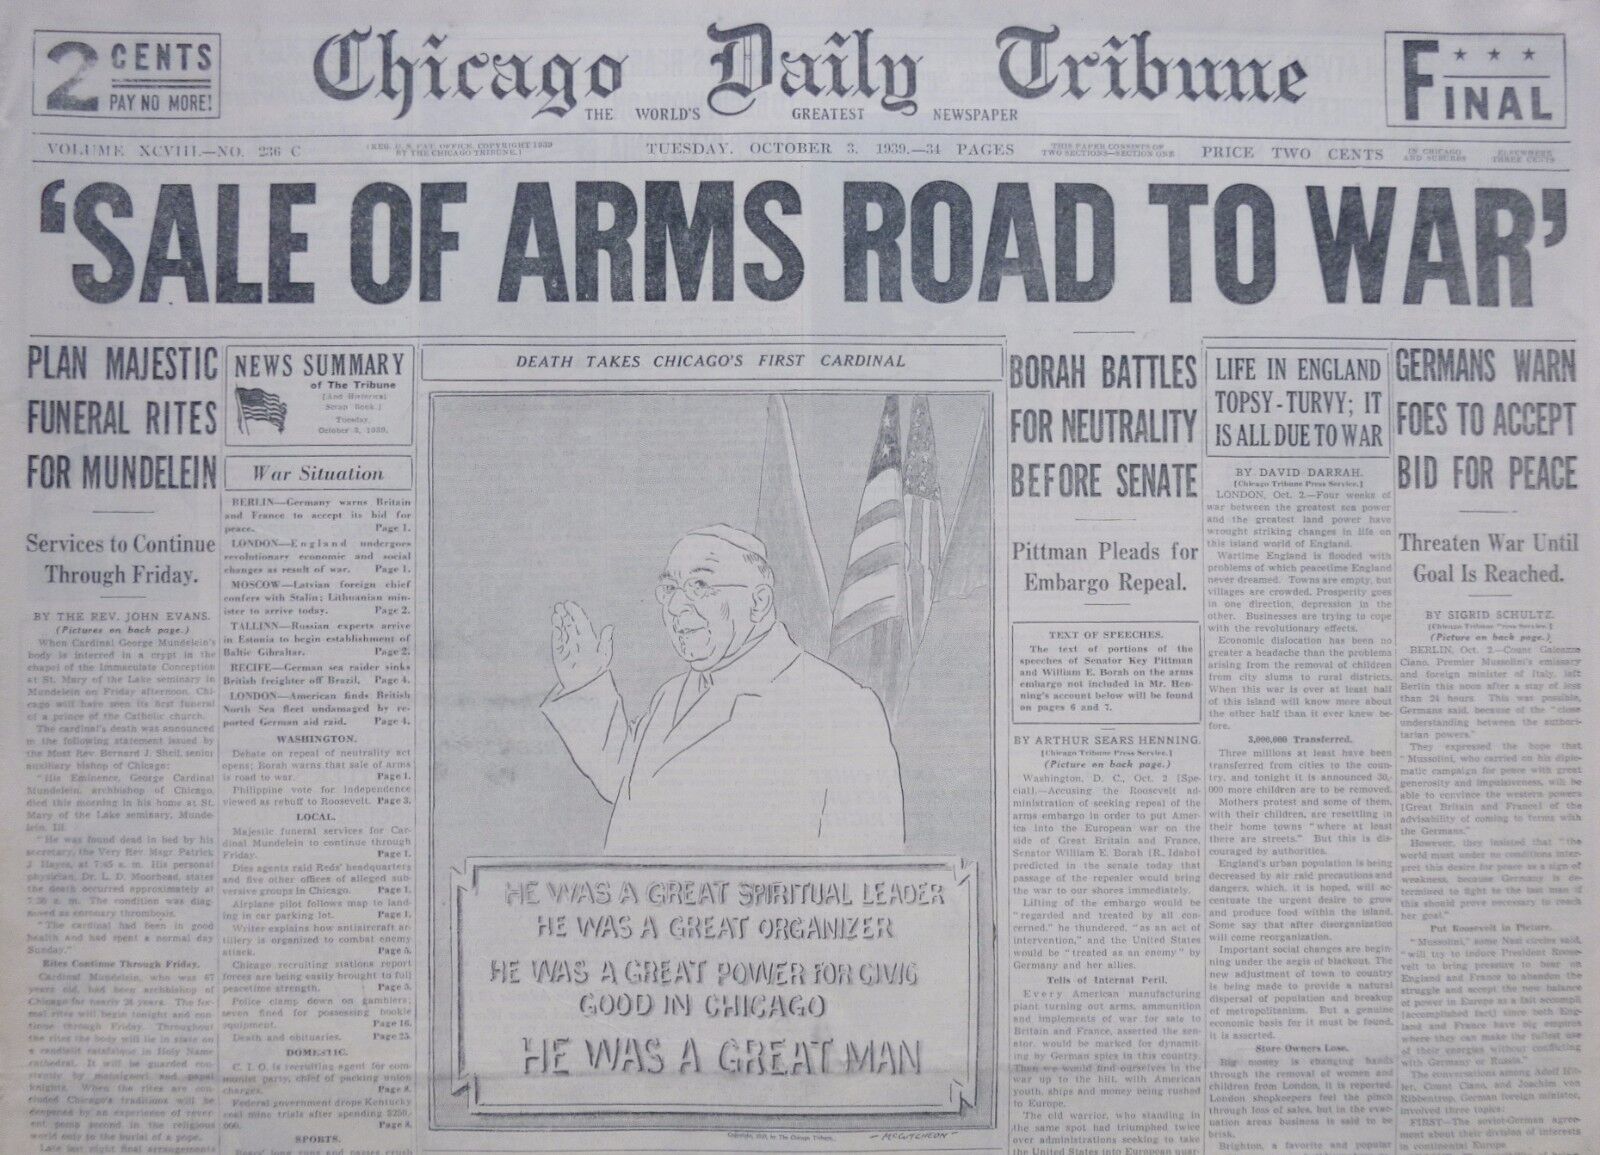 10-1939 WWII October 3 SALE OF ARMS ROAD TO WAR. DEATH TAKES CHICAGO CARDINAL 